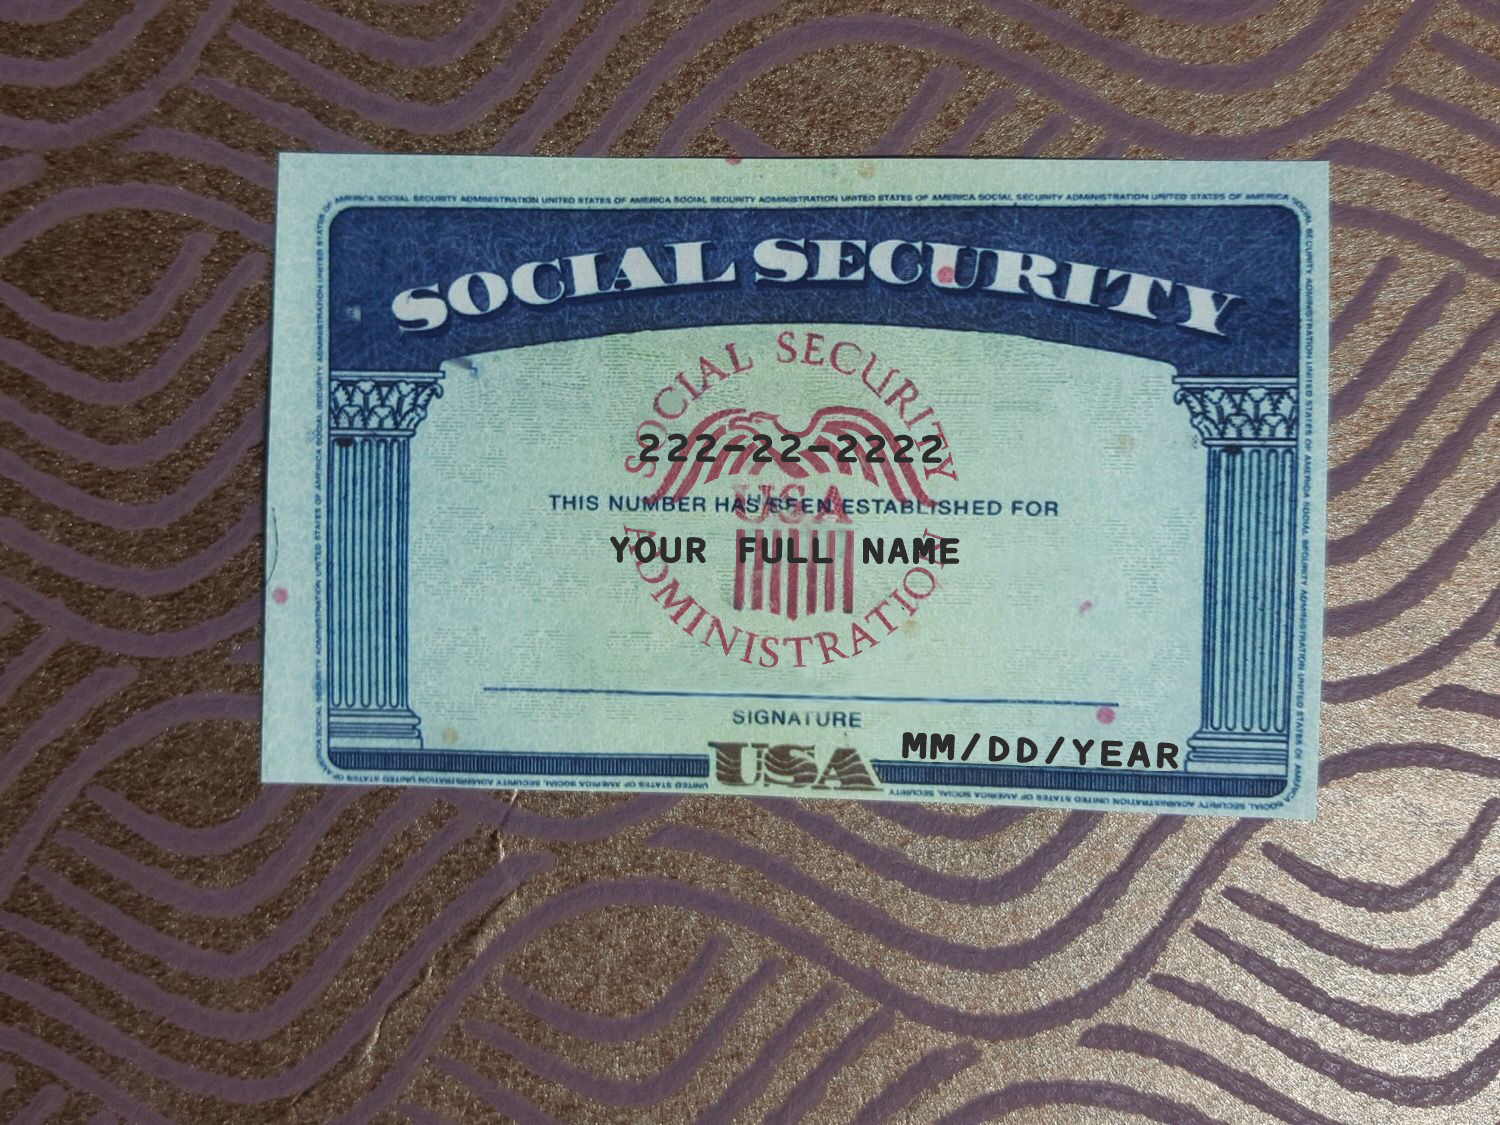 Social Security Card 01 – SSN DOWNLOAD